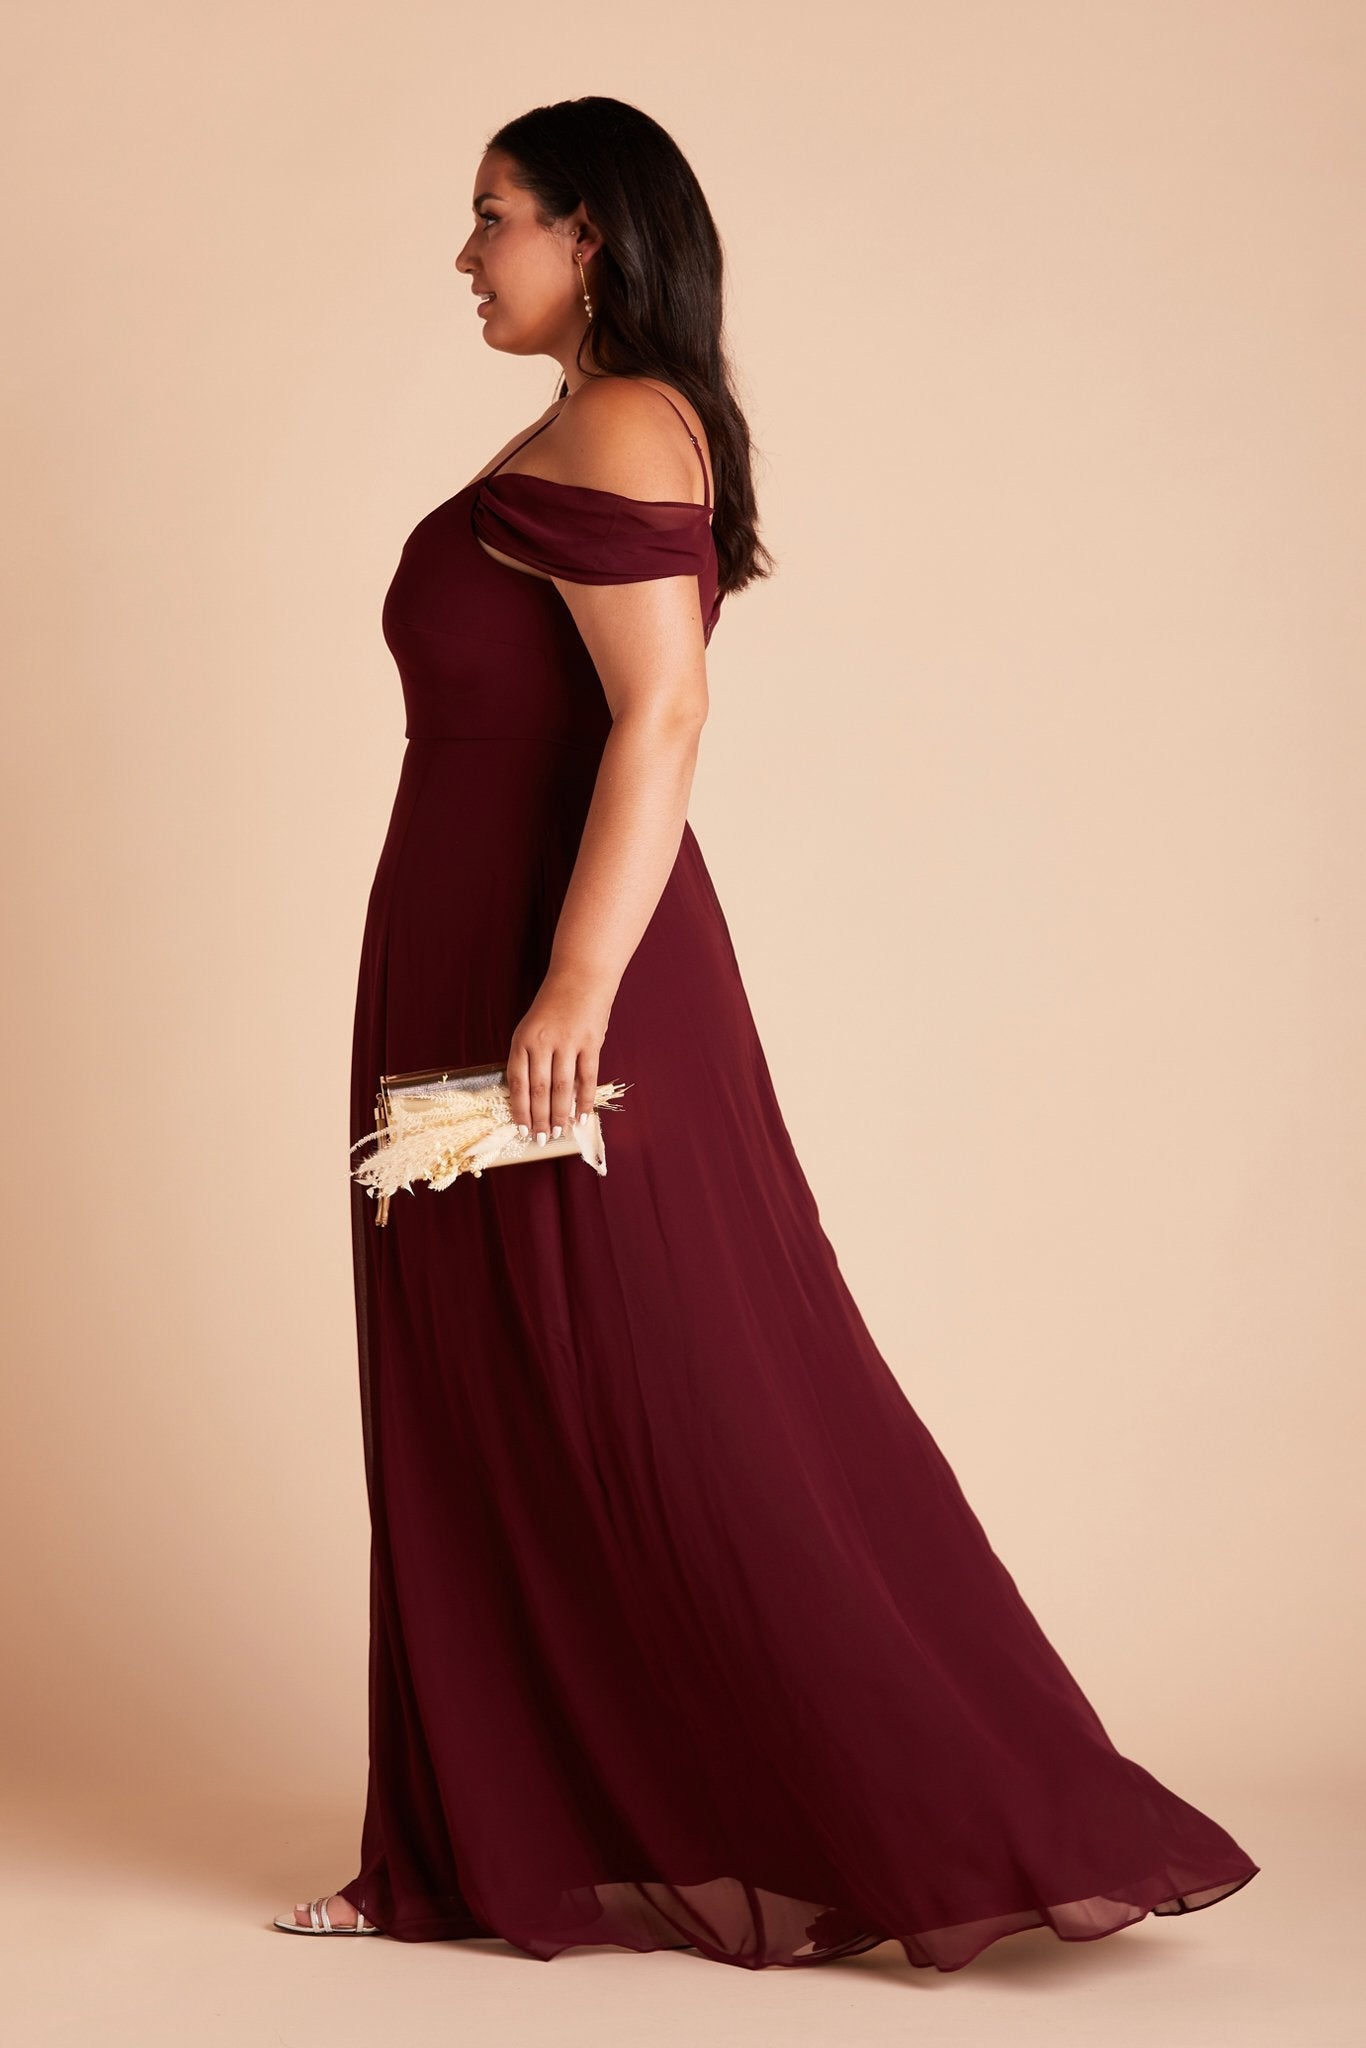 Devin convertible plus size bridesmaid dress in cabernet burgundy chiffon by Birdy Grey, side view